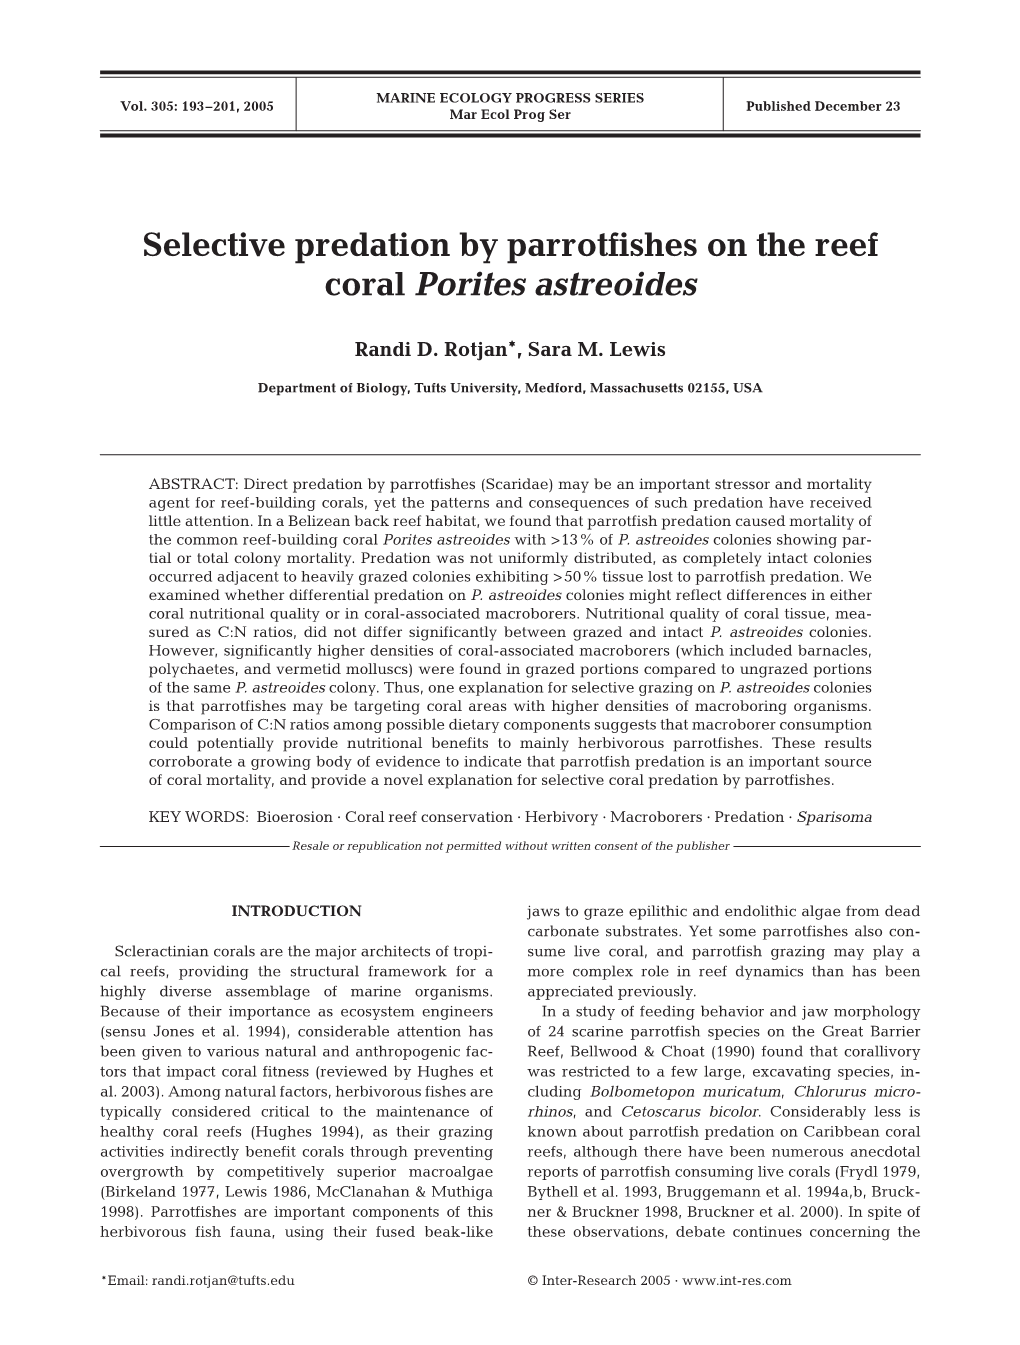 Selective Predation by Parrotfishes on the Reef Coral Porites Astreoides